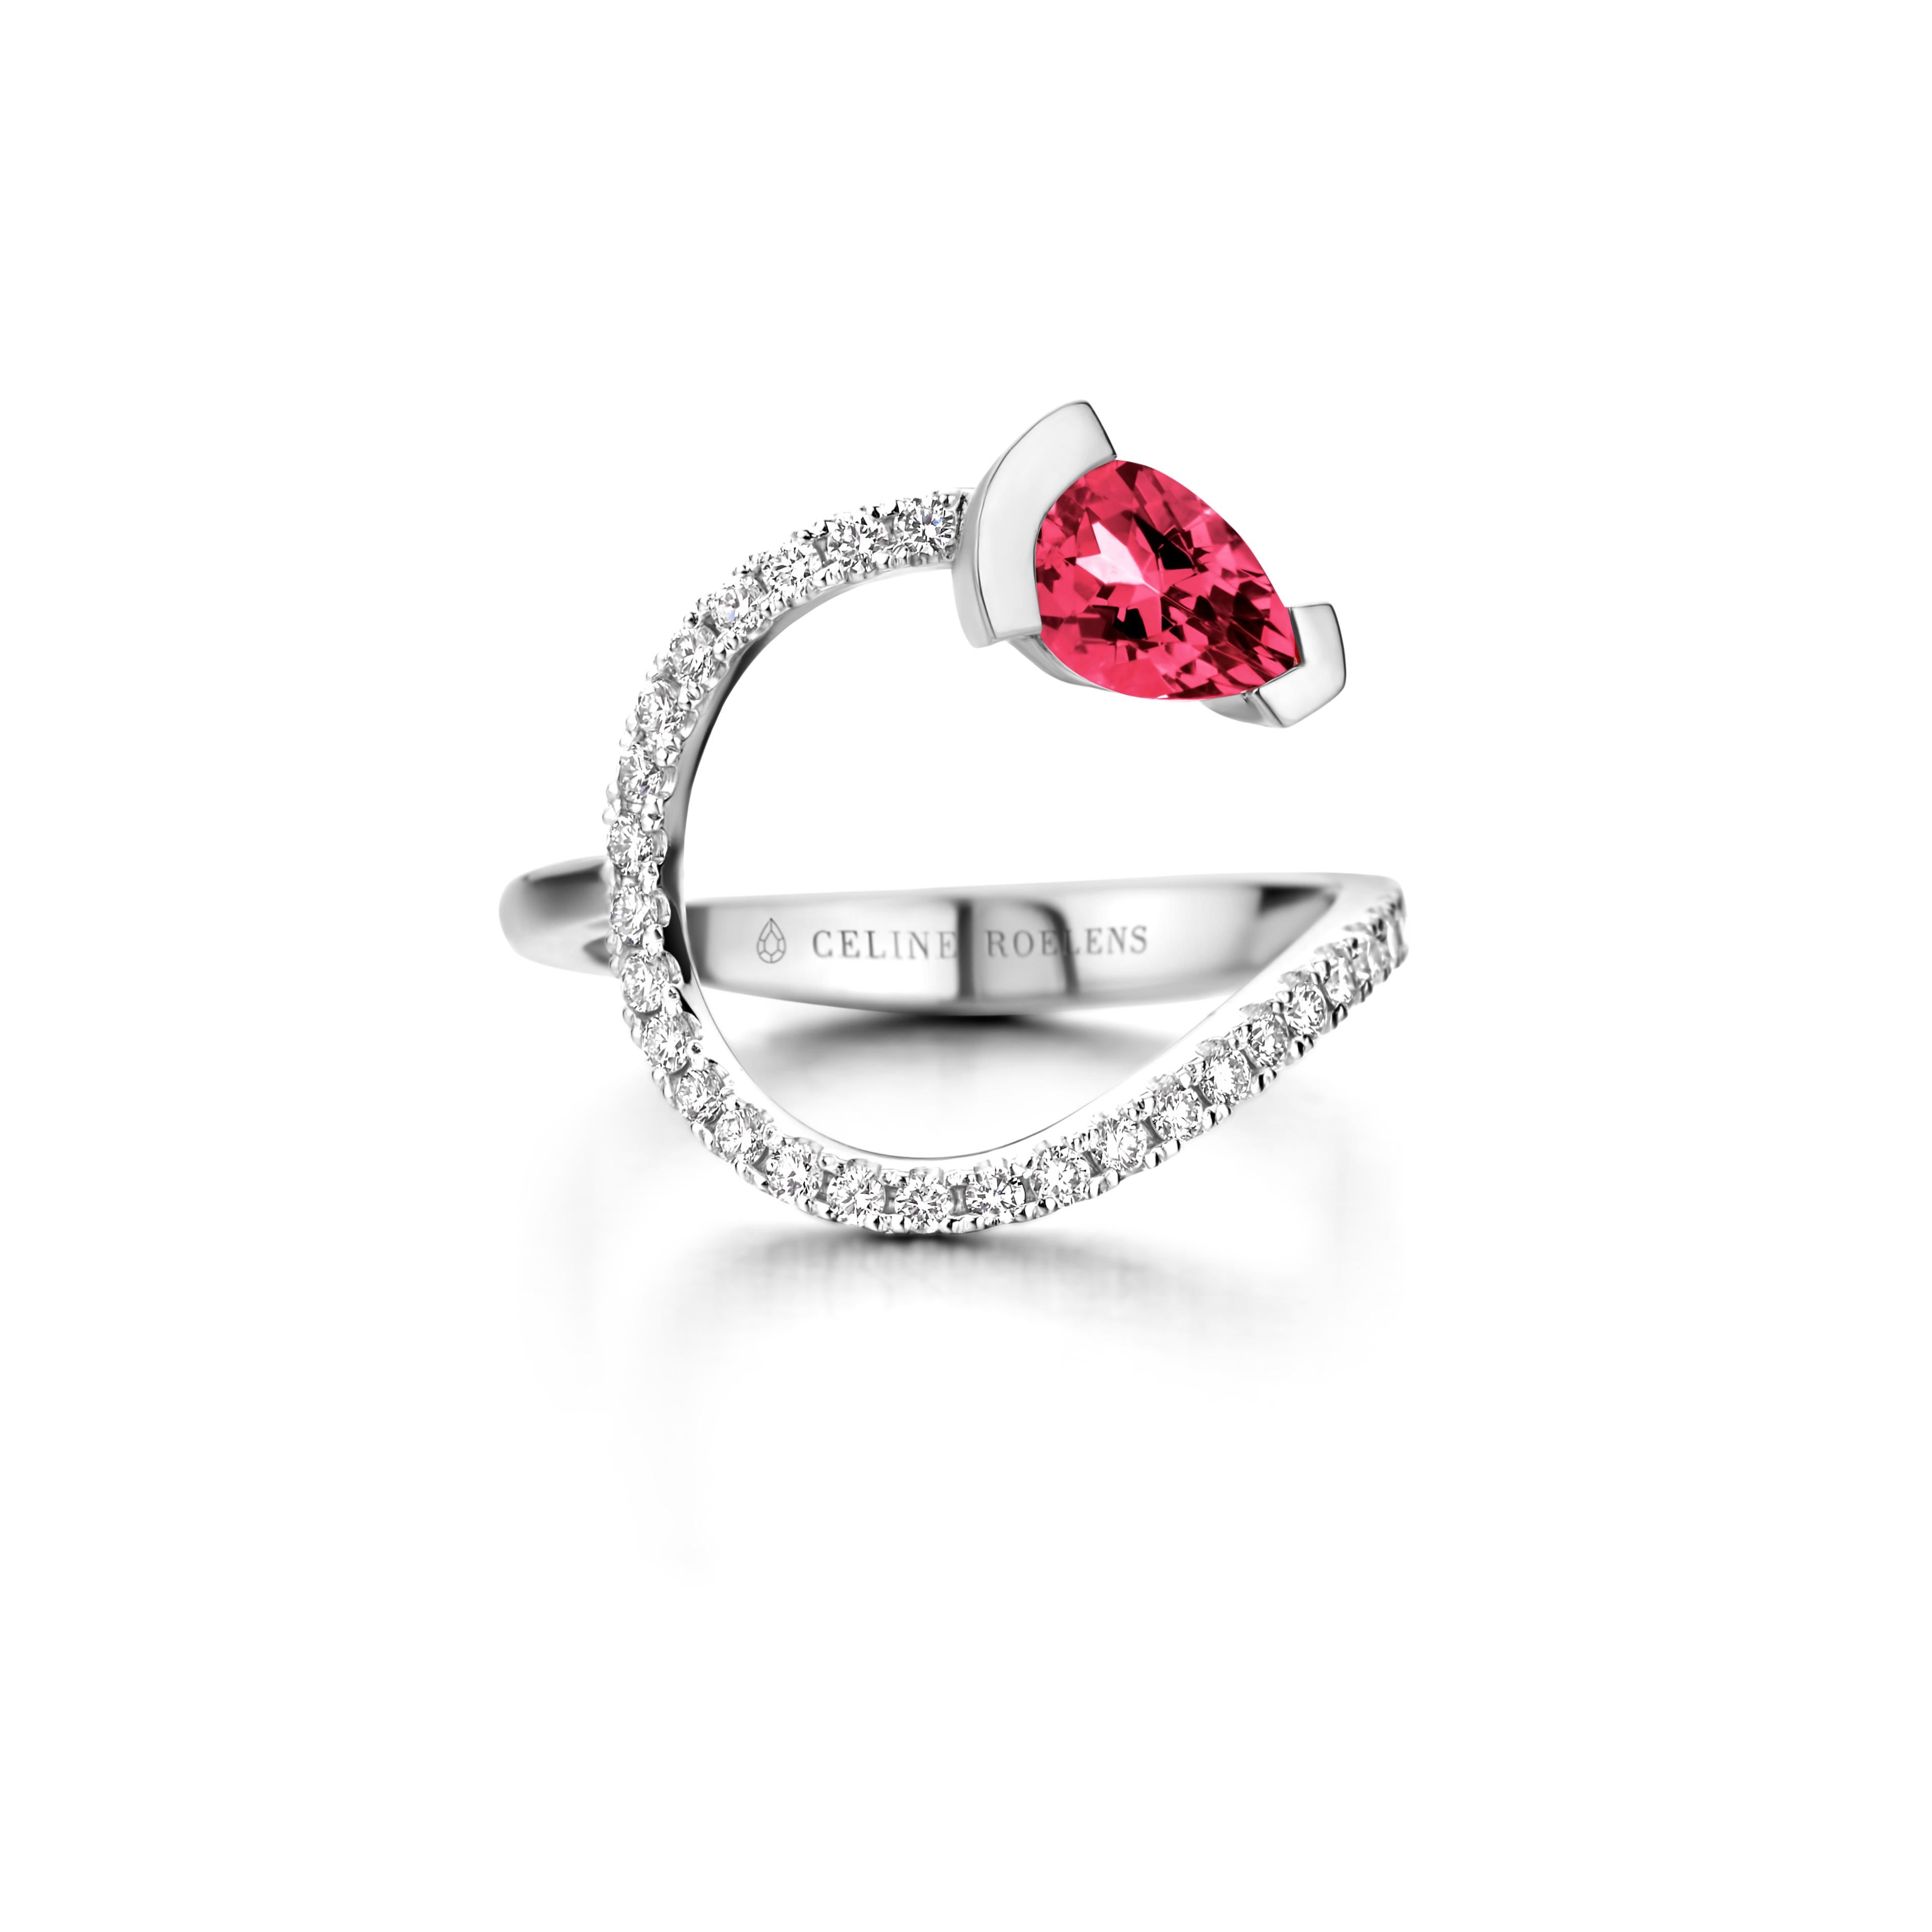 ADELINE curved ring in 18Kt rose gold set with a pear shaped Rubellite and 0,33 Ct of white brilliant cut diamonds - VS F quality.